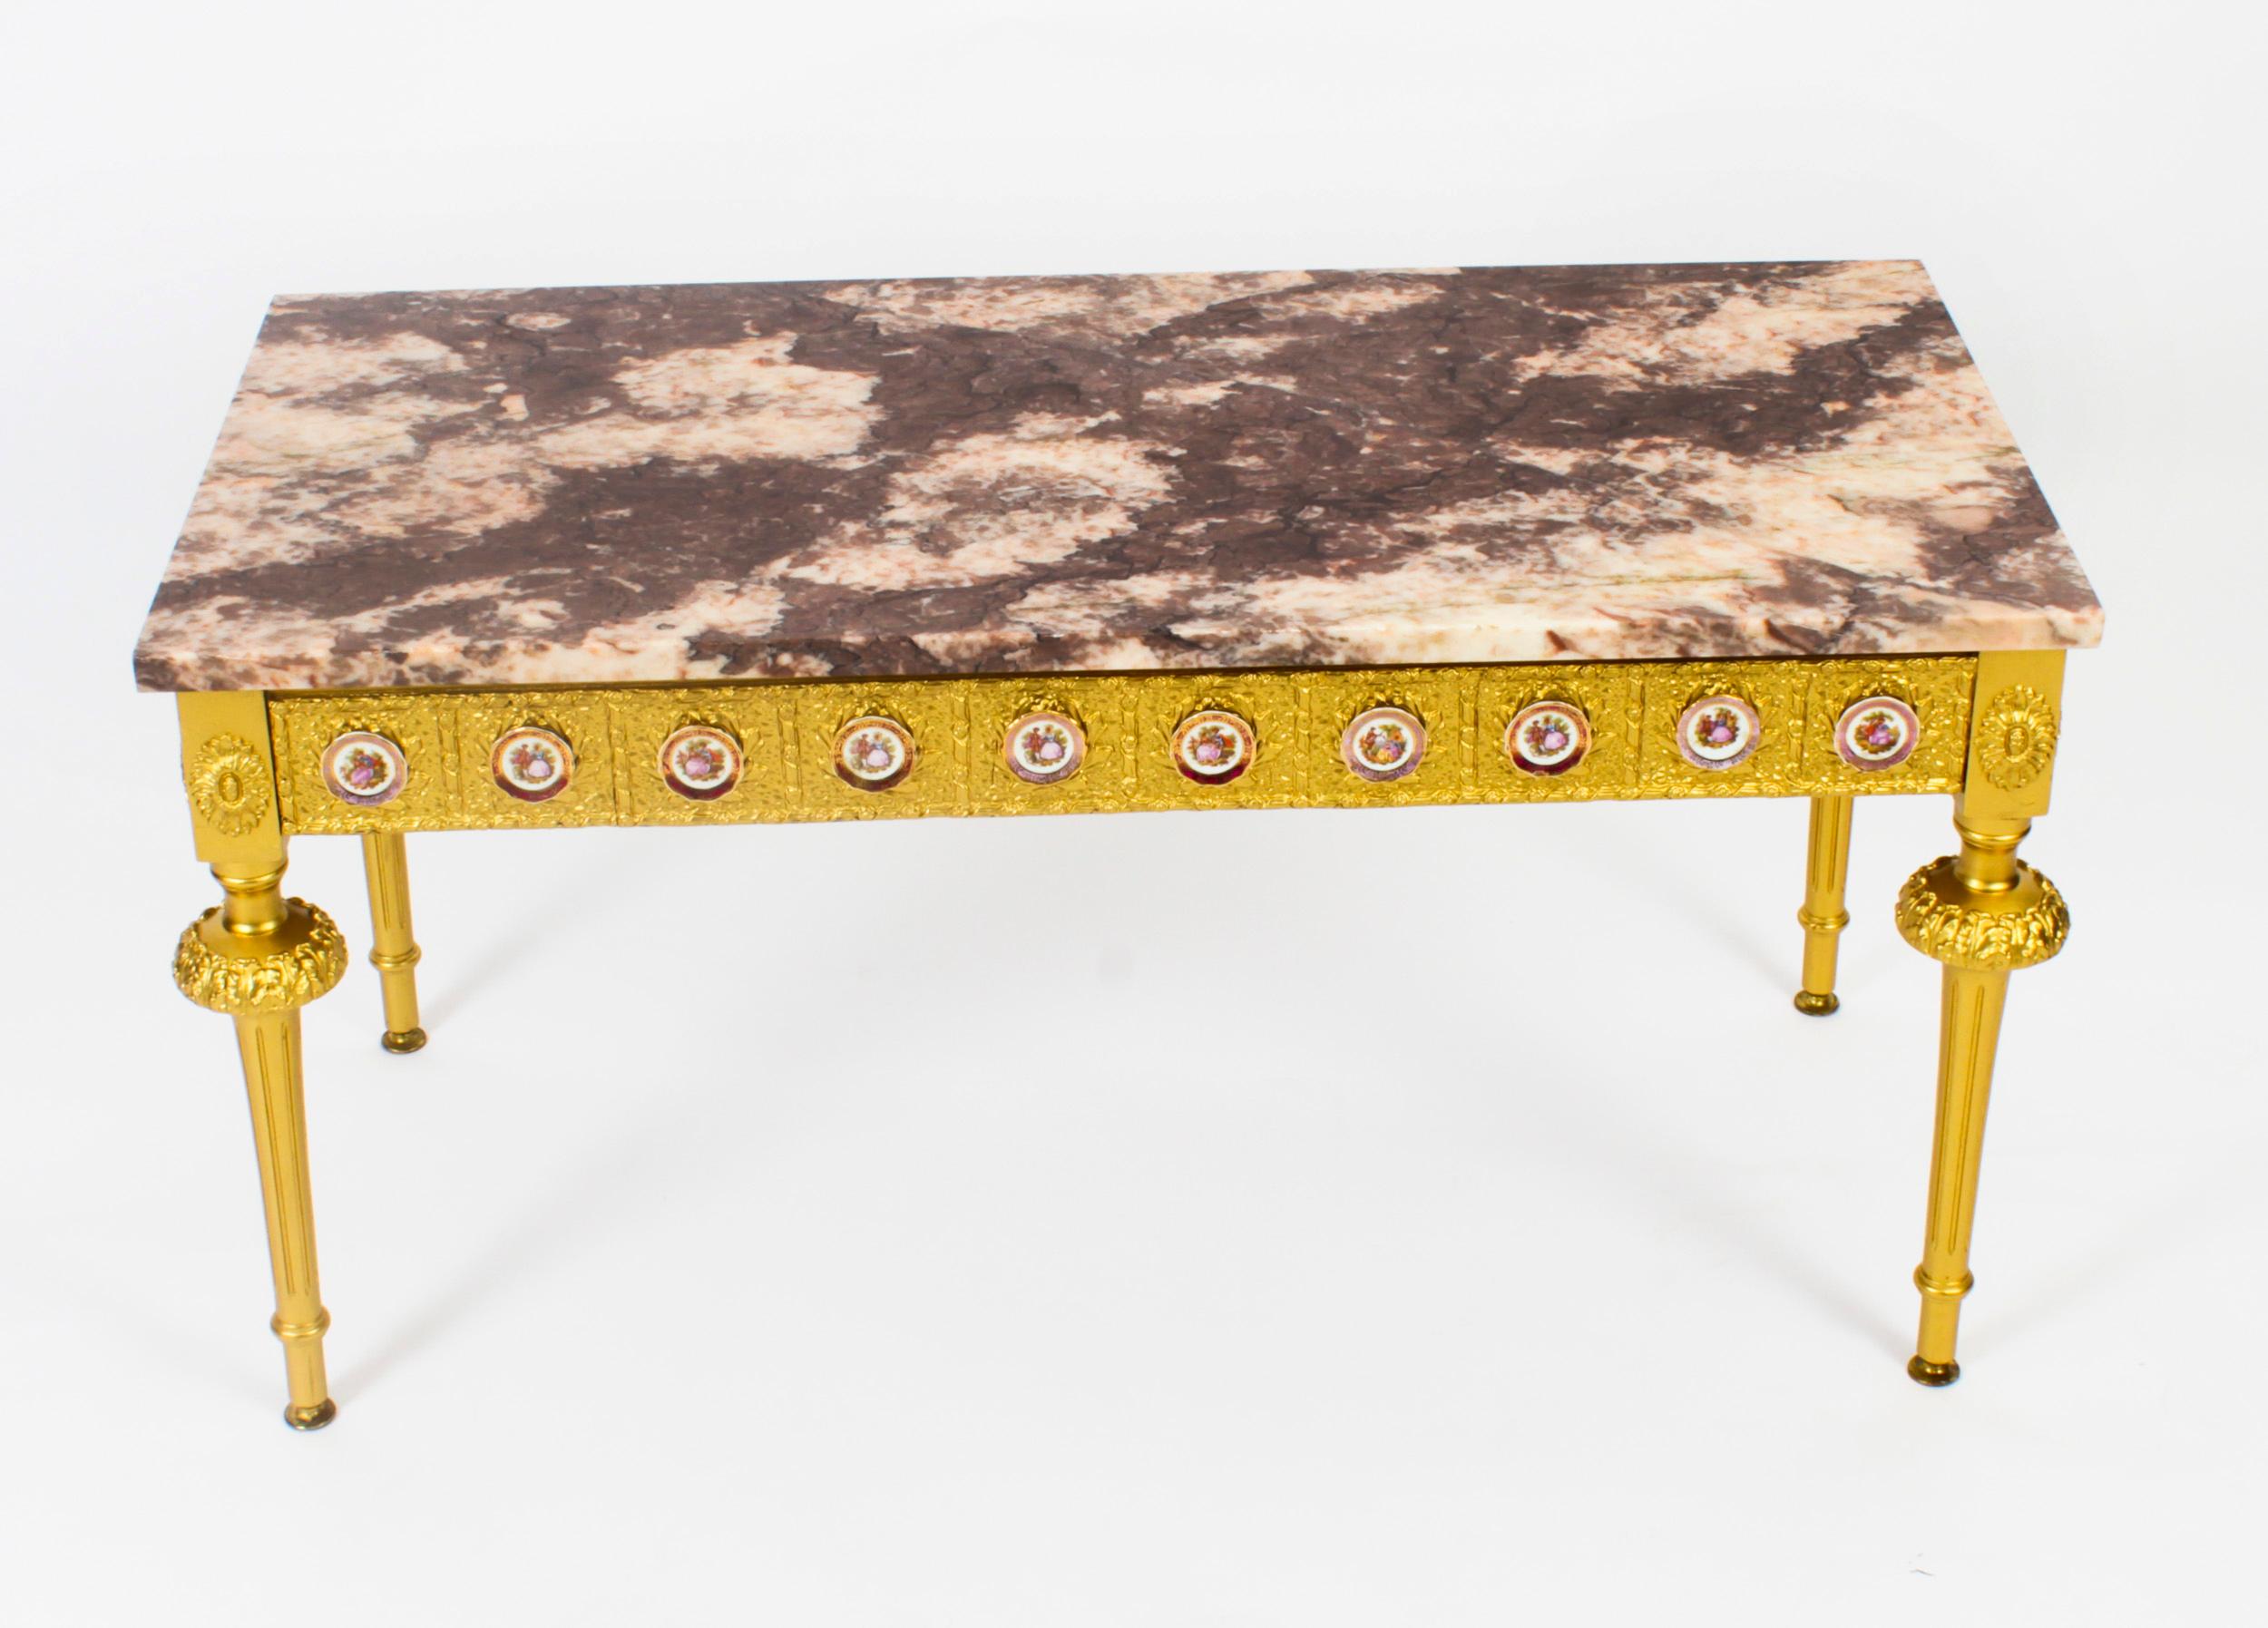 This is an exquisite French giltwood and marble top coffee table with Limoges plaques, circa 1950 in date.

This wonderful coffee table is rectangular in shape and has four elegant and stylish tapering fluted legs. The frieze features stunning